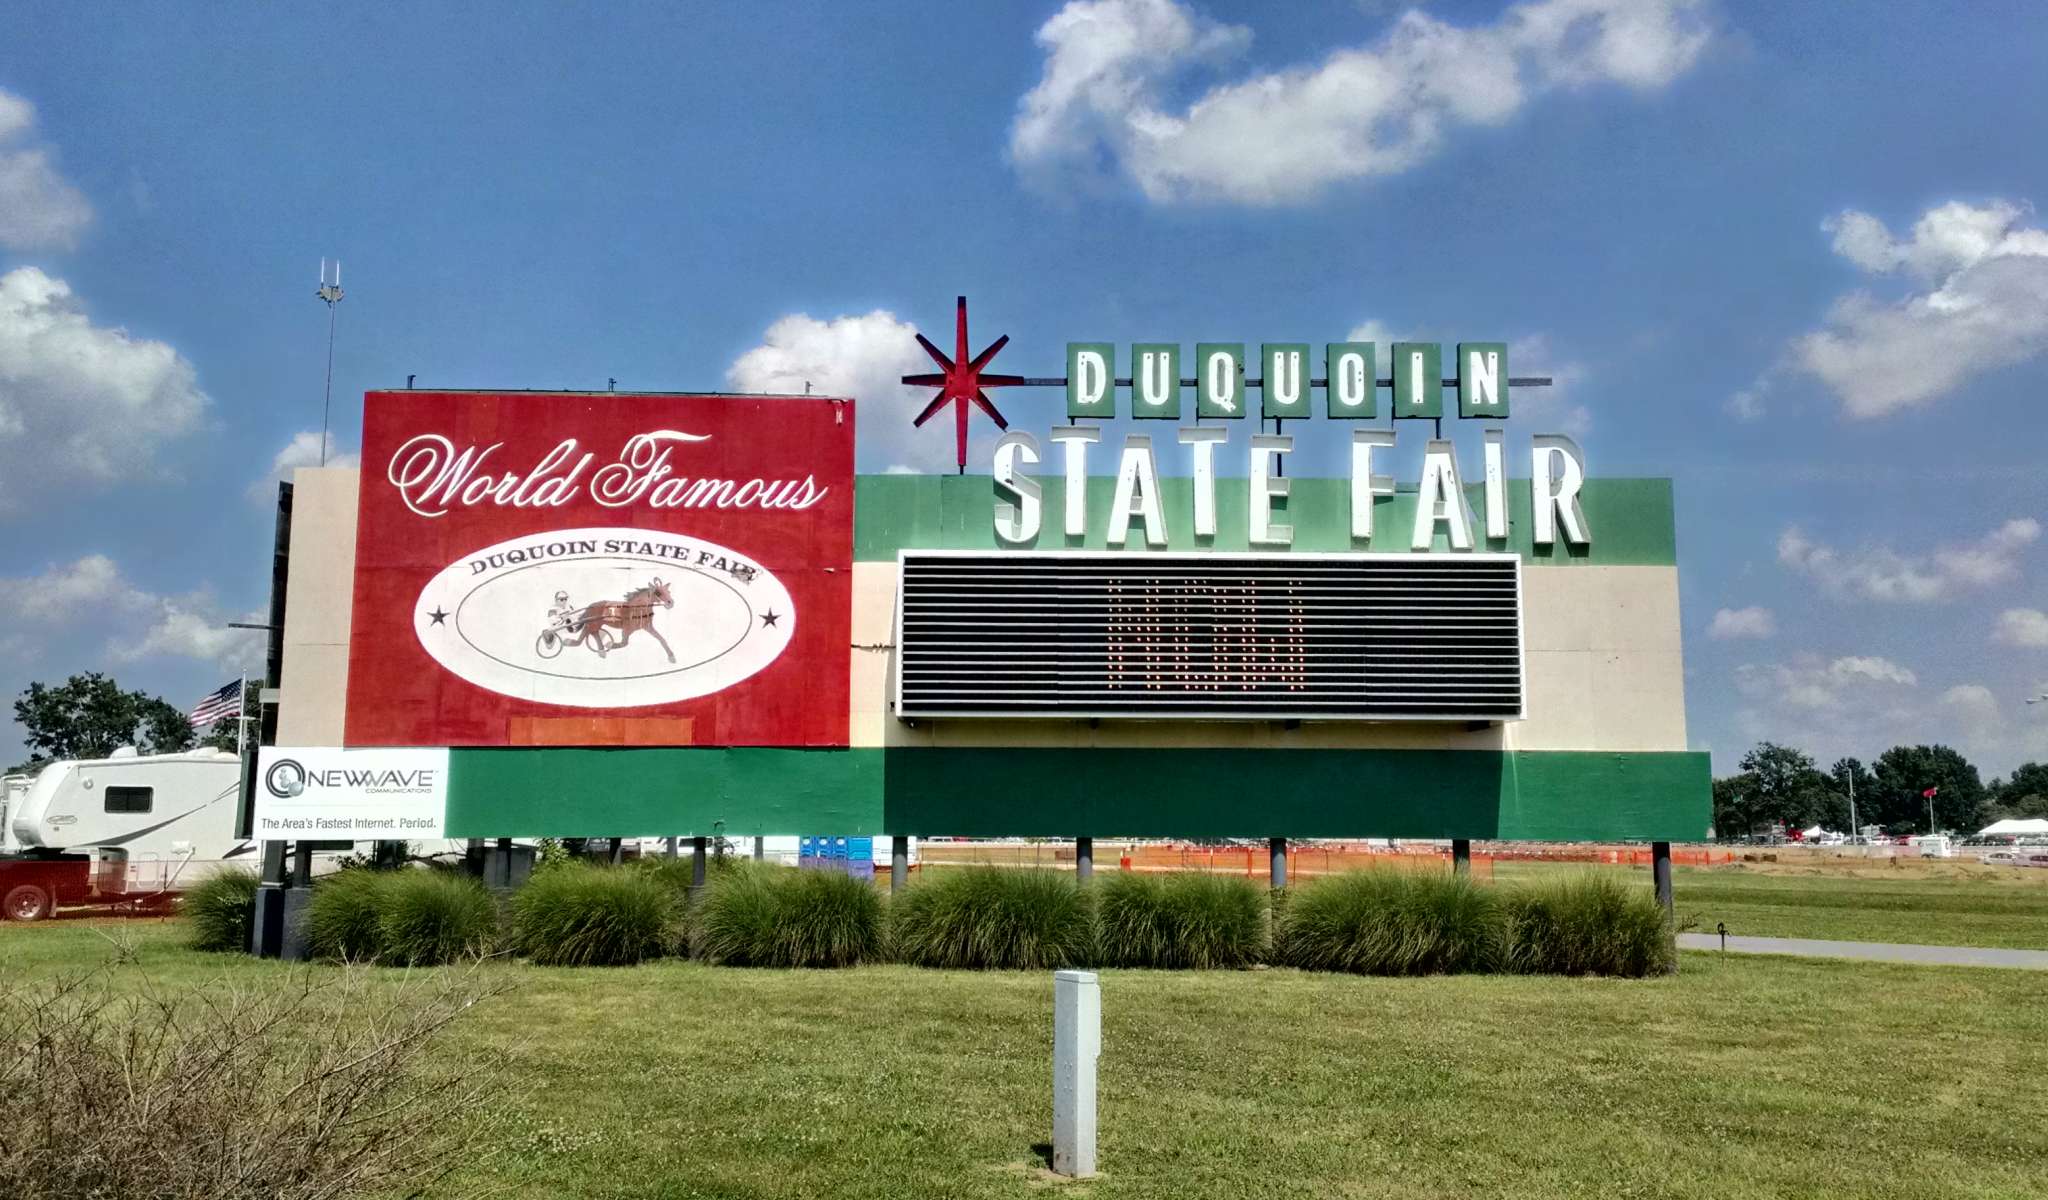 The sign for the world famous Du Quoin State Fair